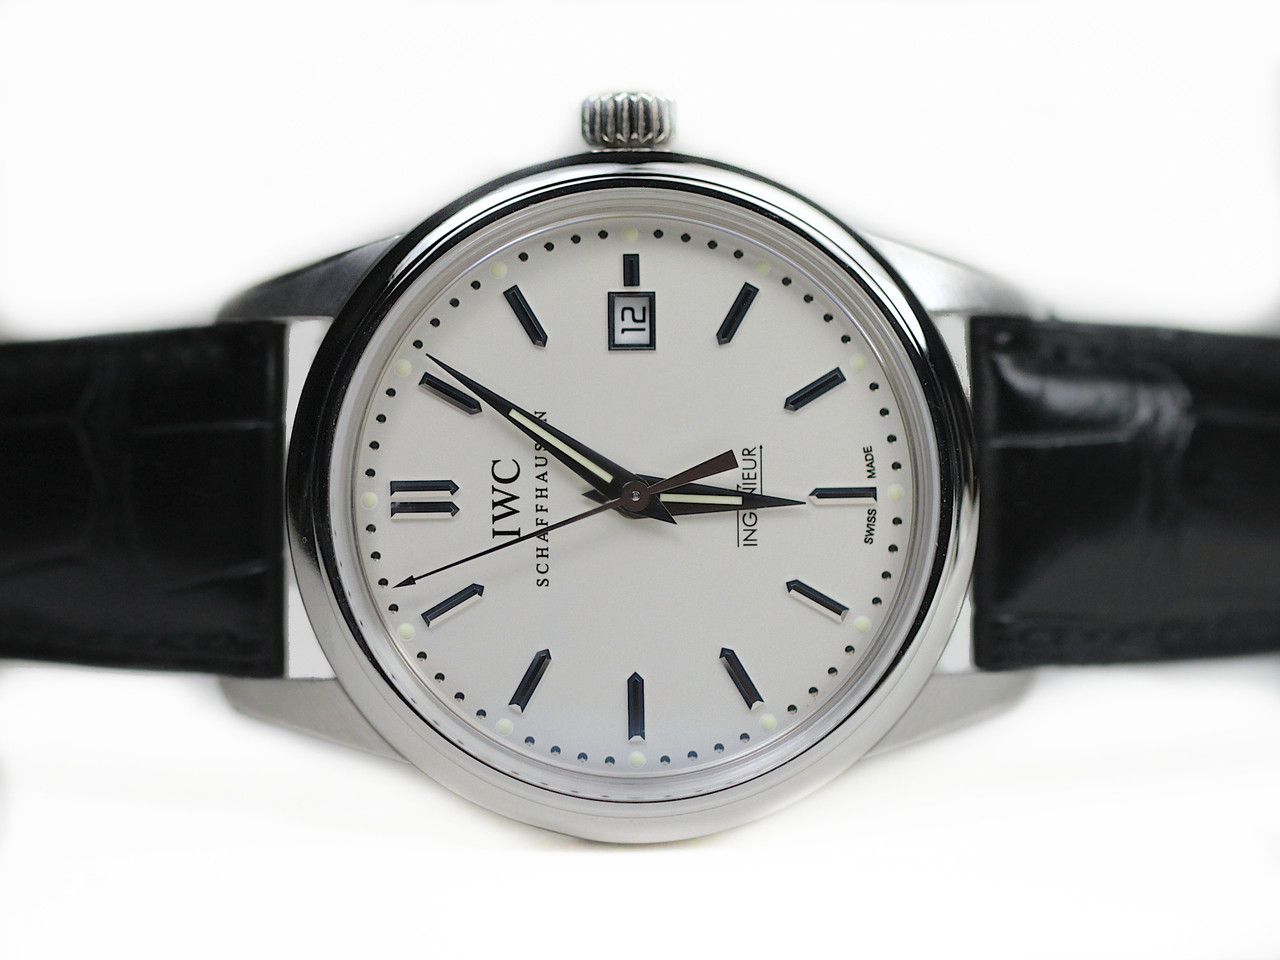 IWC Limited Edition Vintage Ingenieur Auto Watch 3233 from www ...